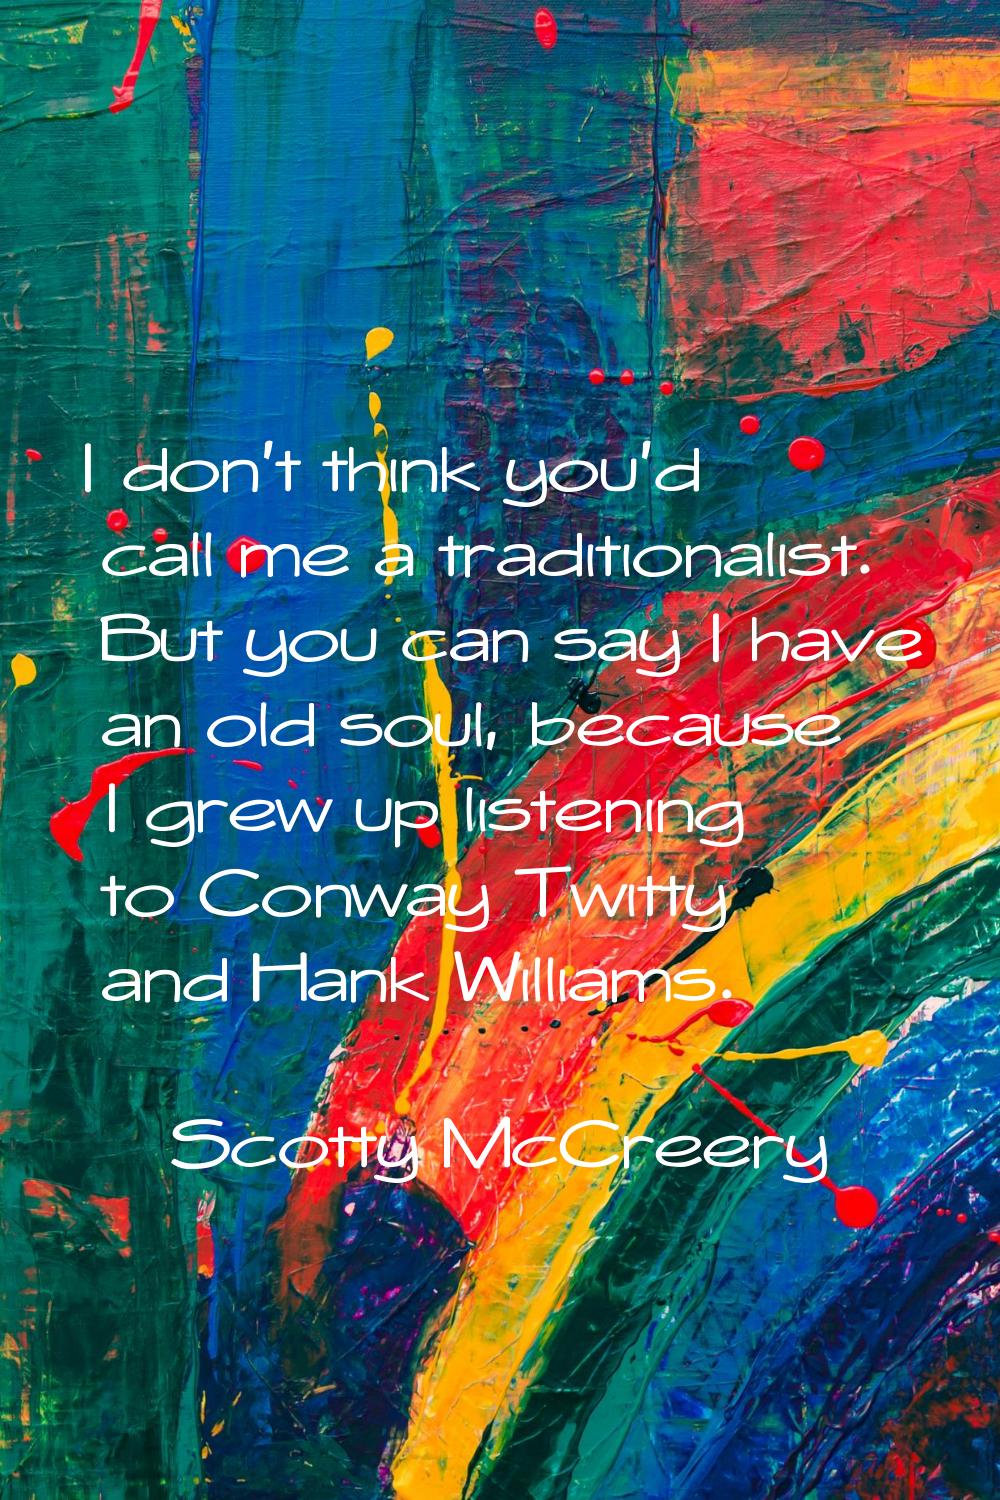 I don't think you'd call me a traditionalist. But you can say I have an old soul, because I grew up